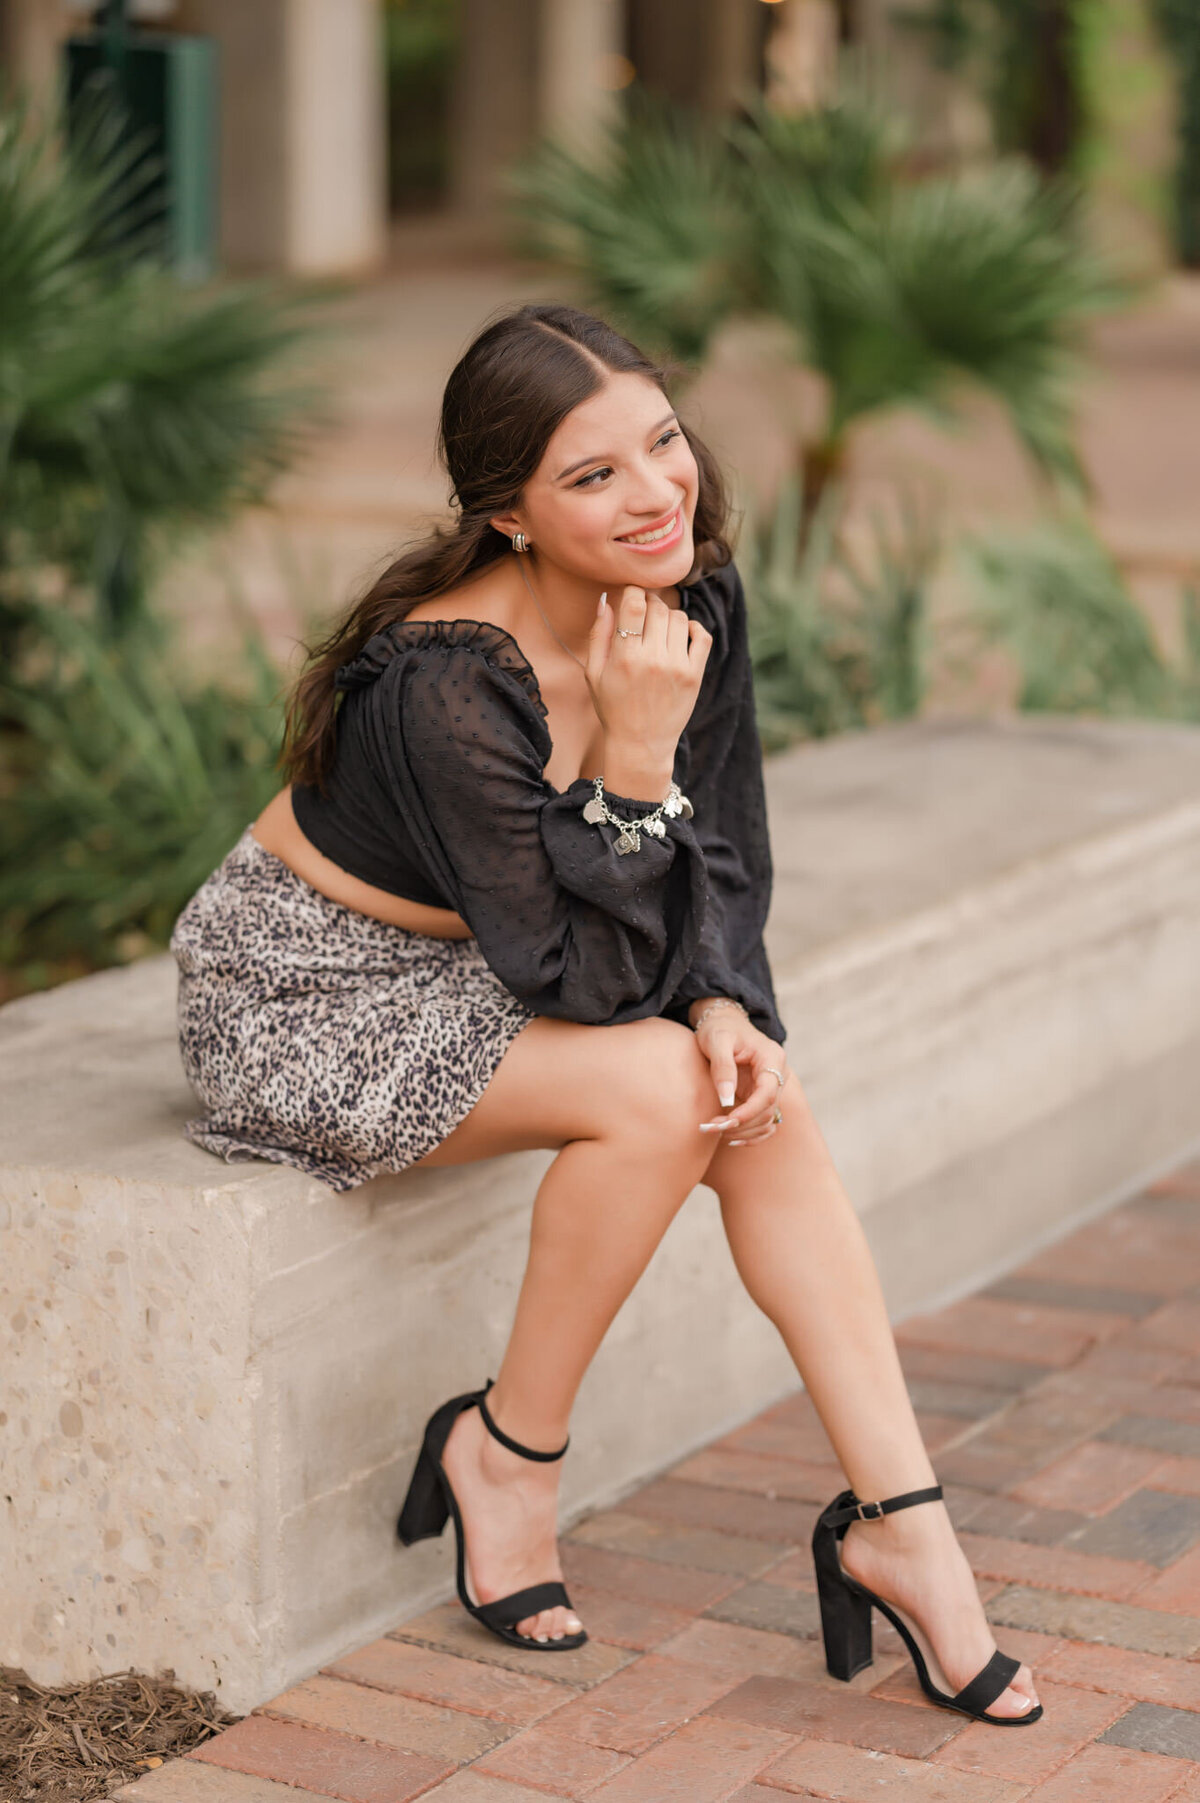 San Antonio senior pictures of a girl at the Pearl, smiling at someone off camera.